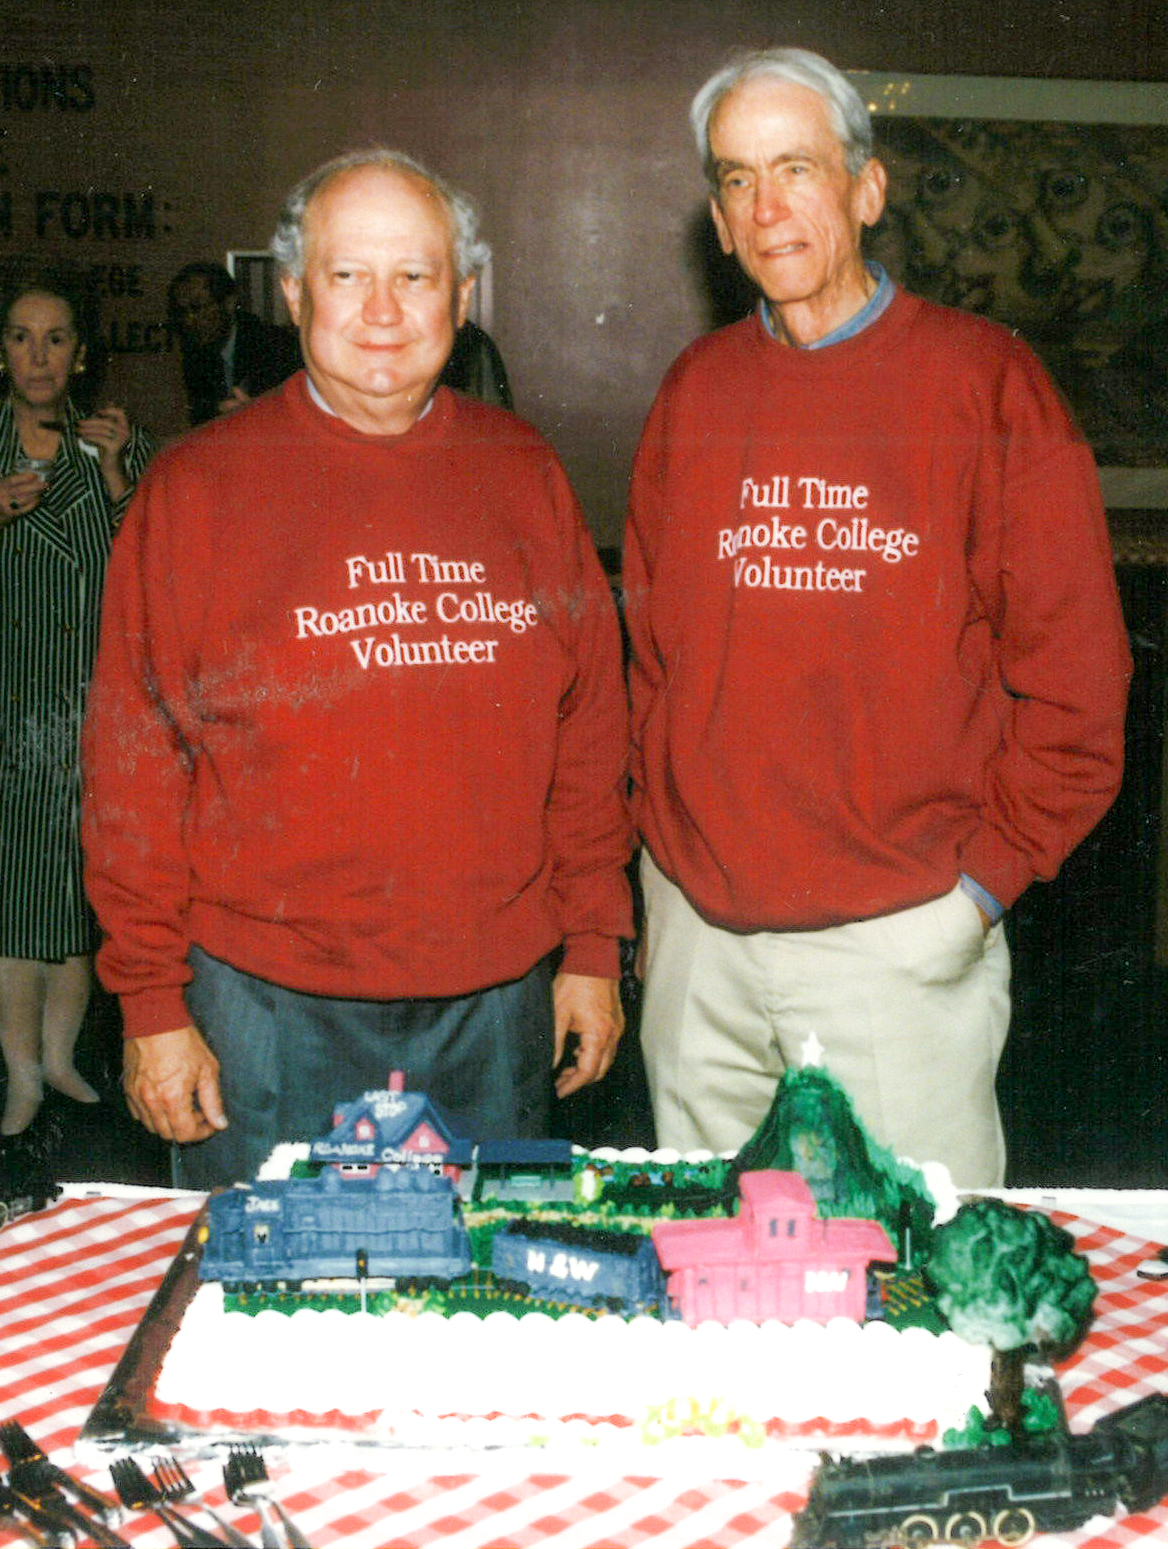 Two men stand matching red sweatshirts that say "Full Time Roanoke College Volunteer." They are standing in front of a cake with a train on it. 